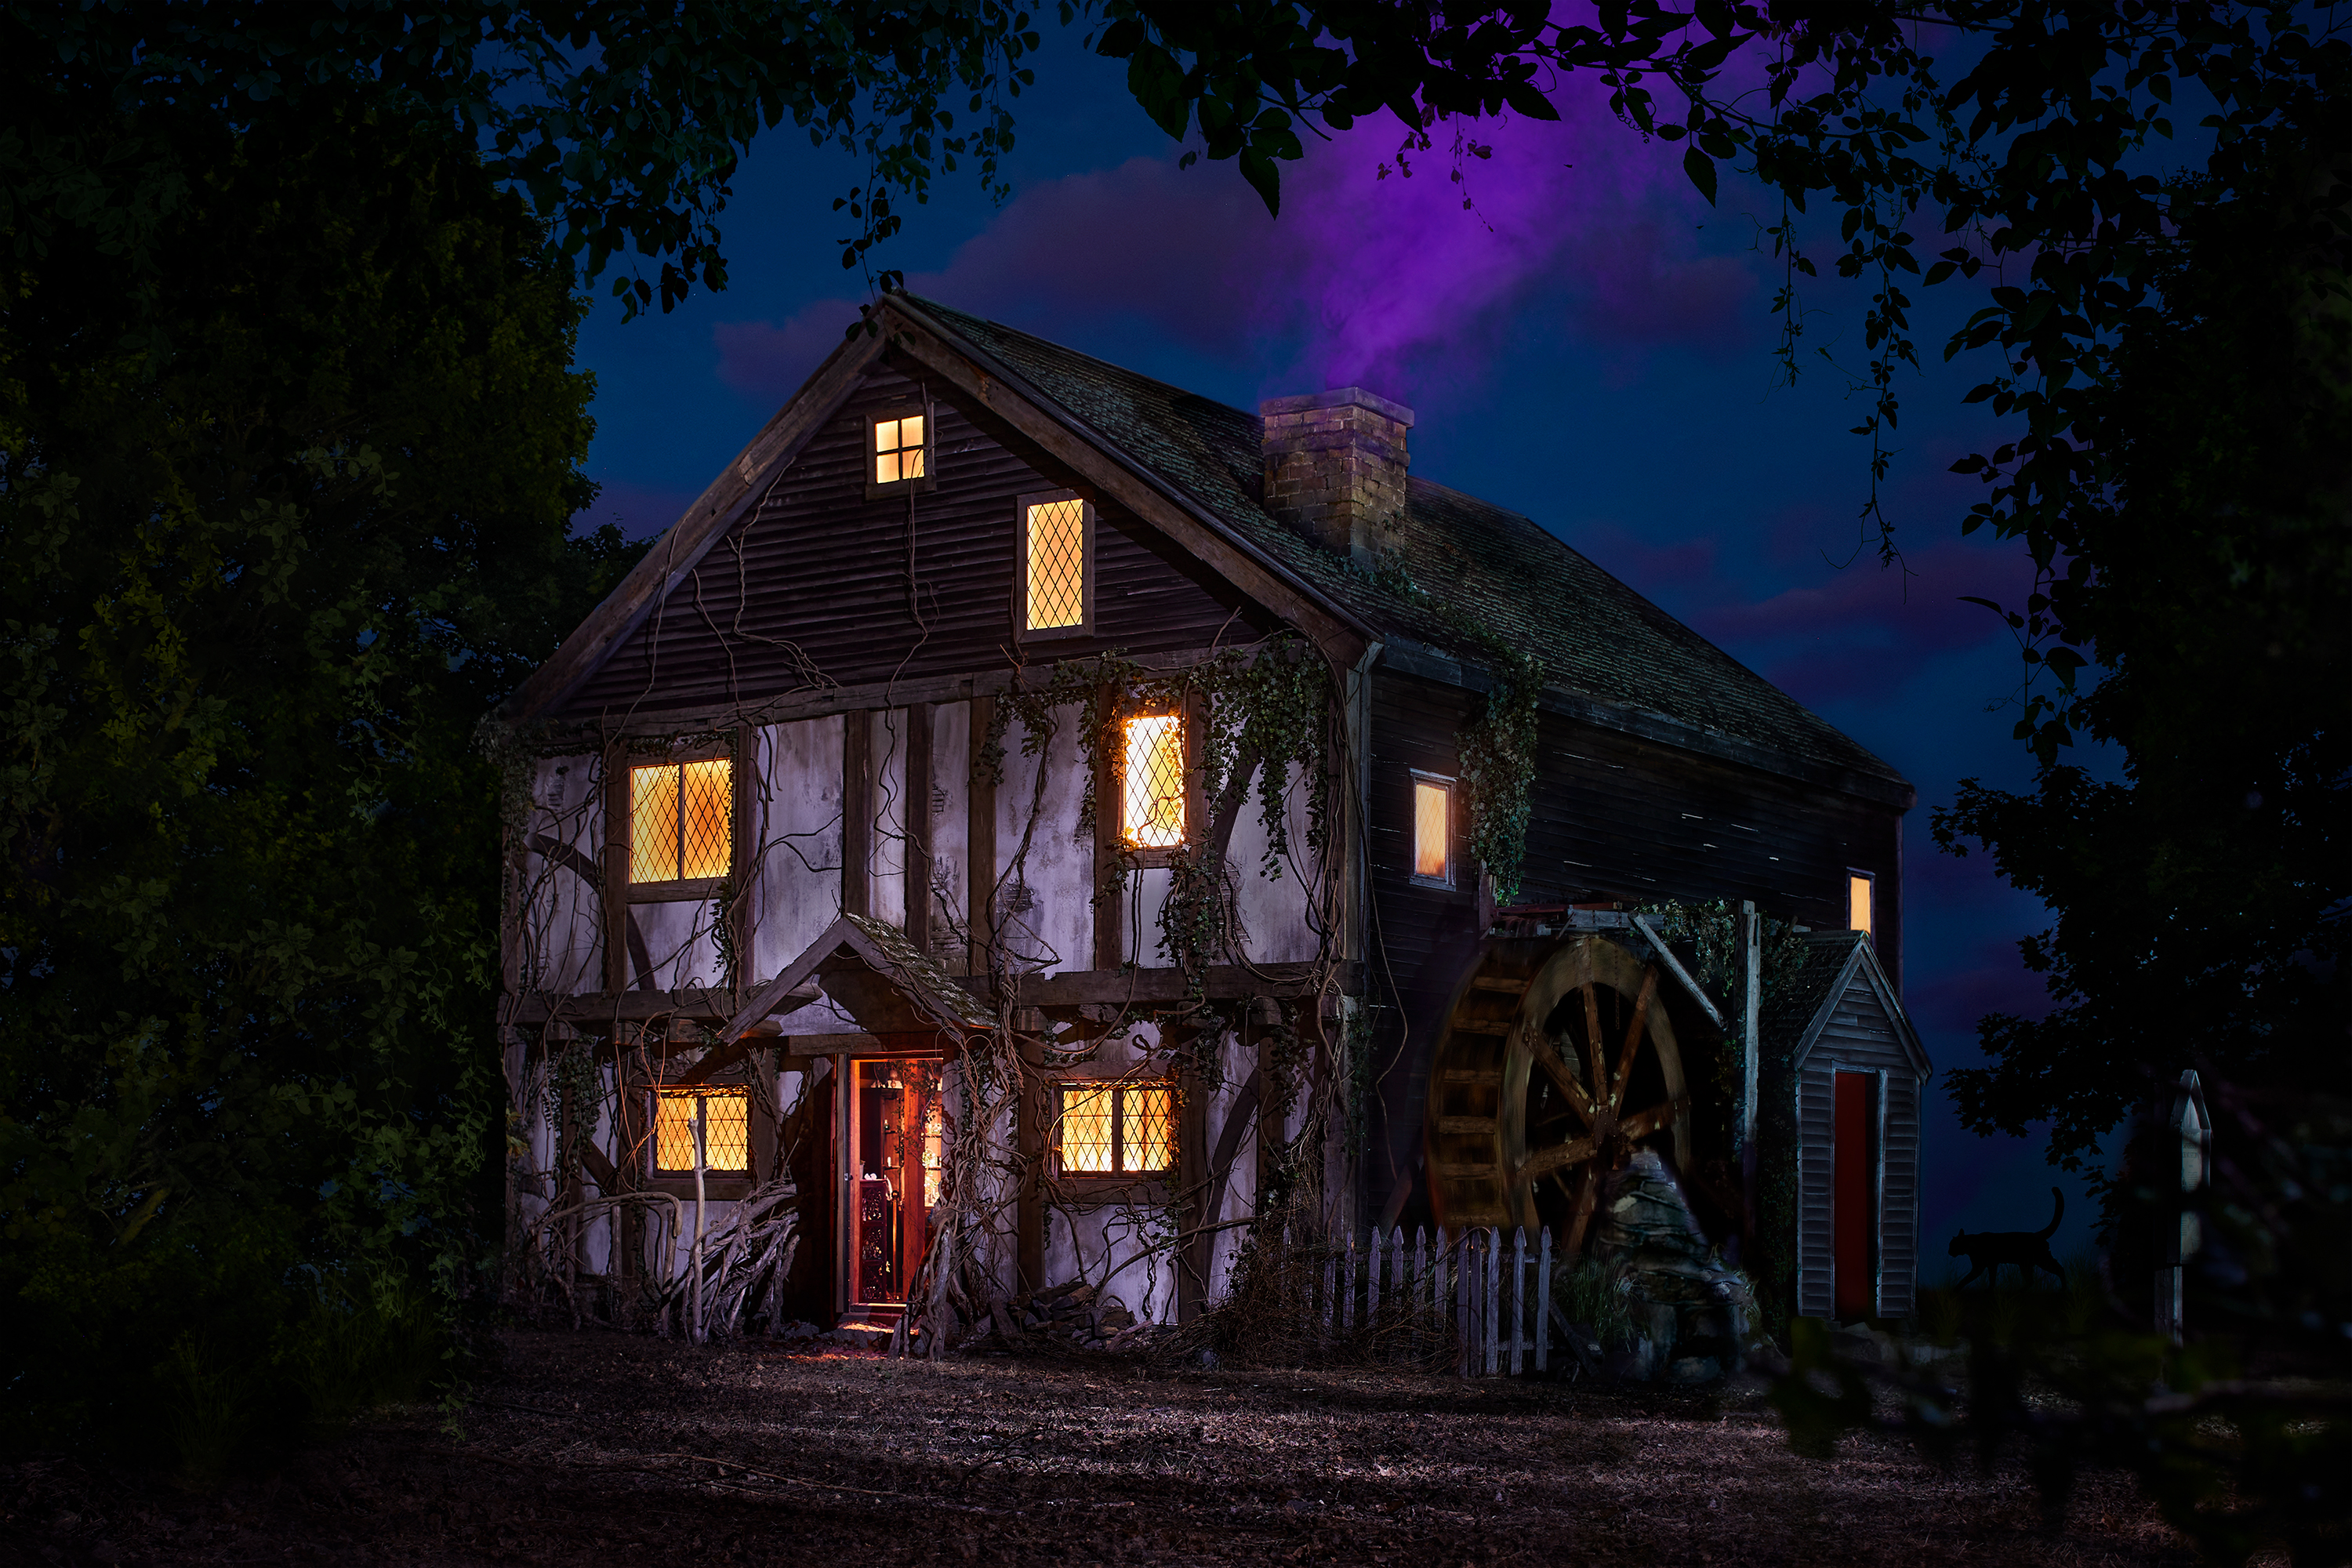 The Sanderson Sisters invite brave souls to book a stay at the Hocus Pocus cottage, now on Airbnb